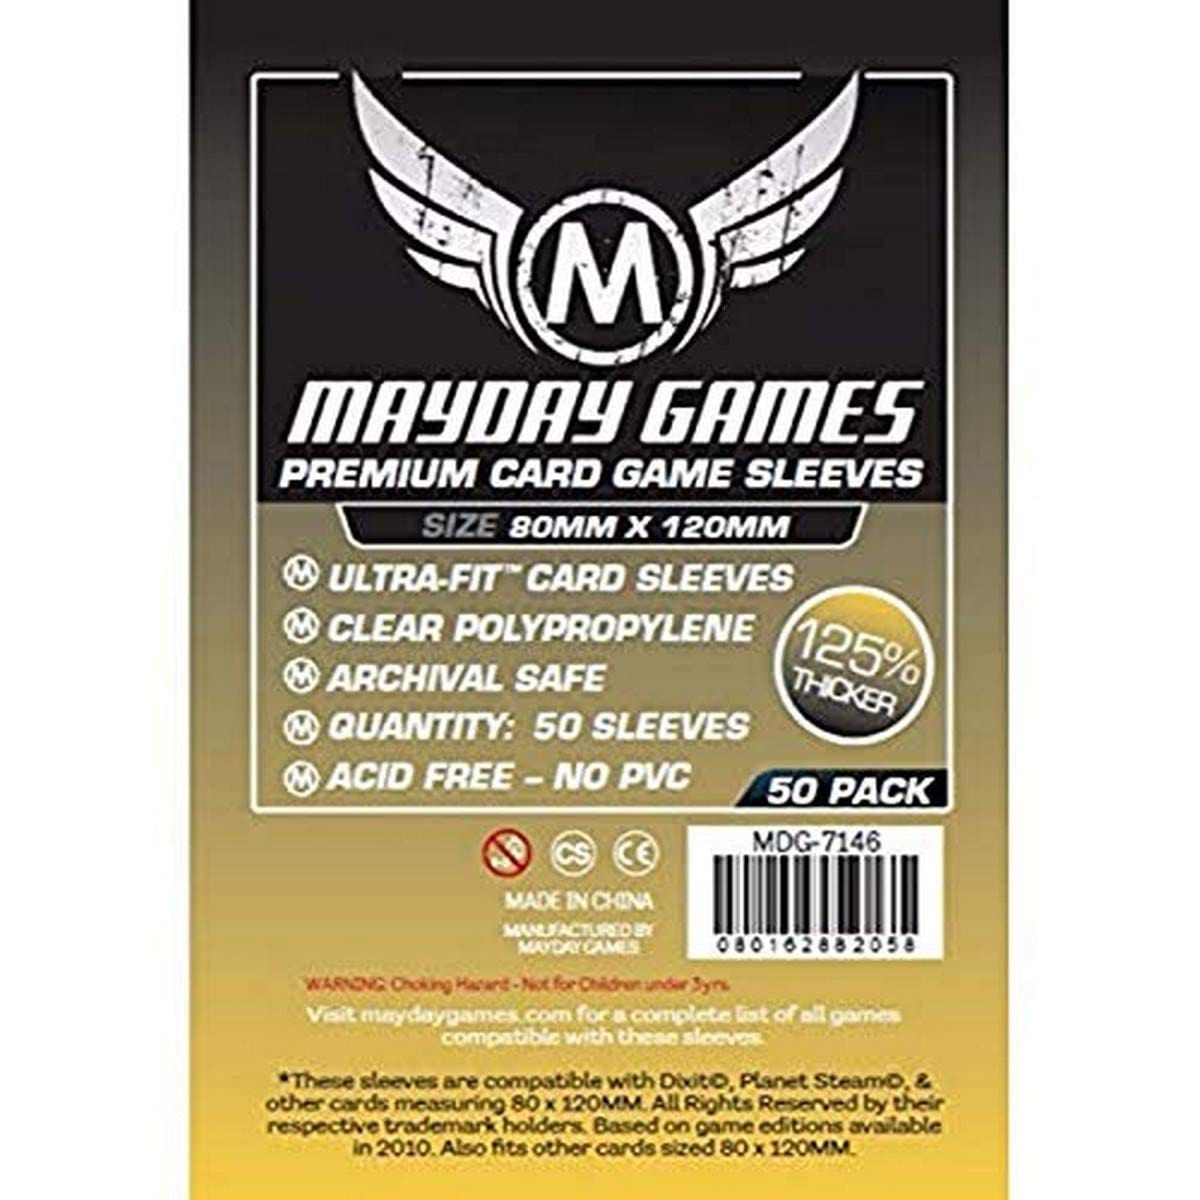 Mayday Games Inc Accessories Mayday Games Inc Sleeves: Premium Magnum Gold Sleeves 80mm x 120mm (Dixit)